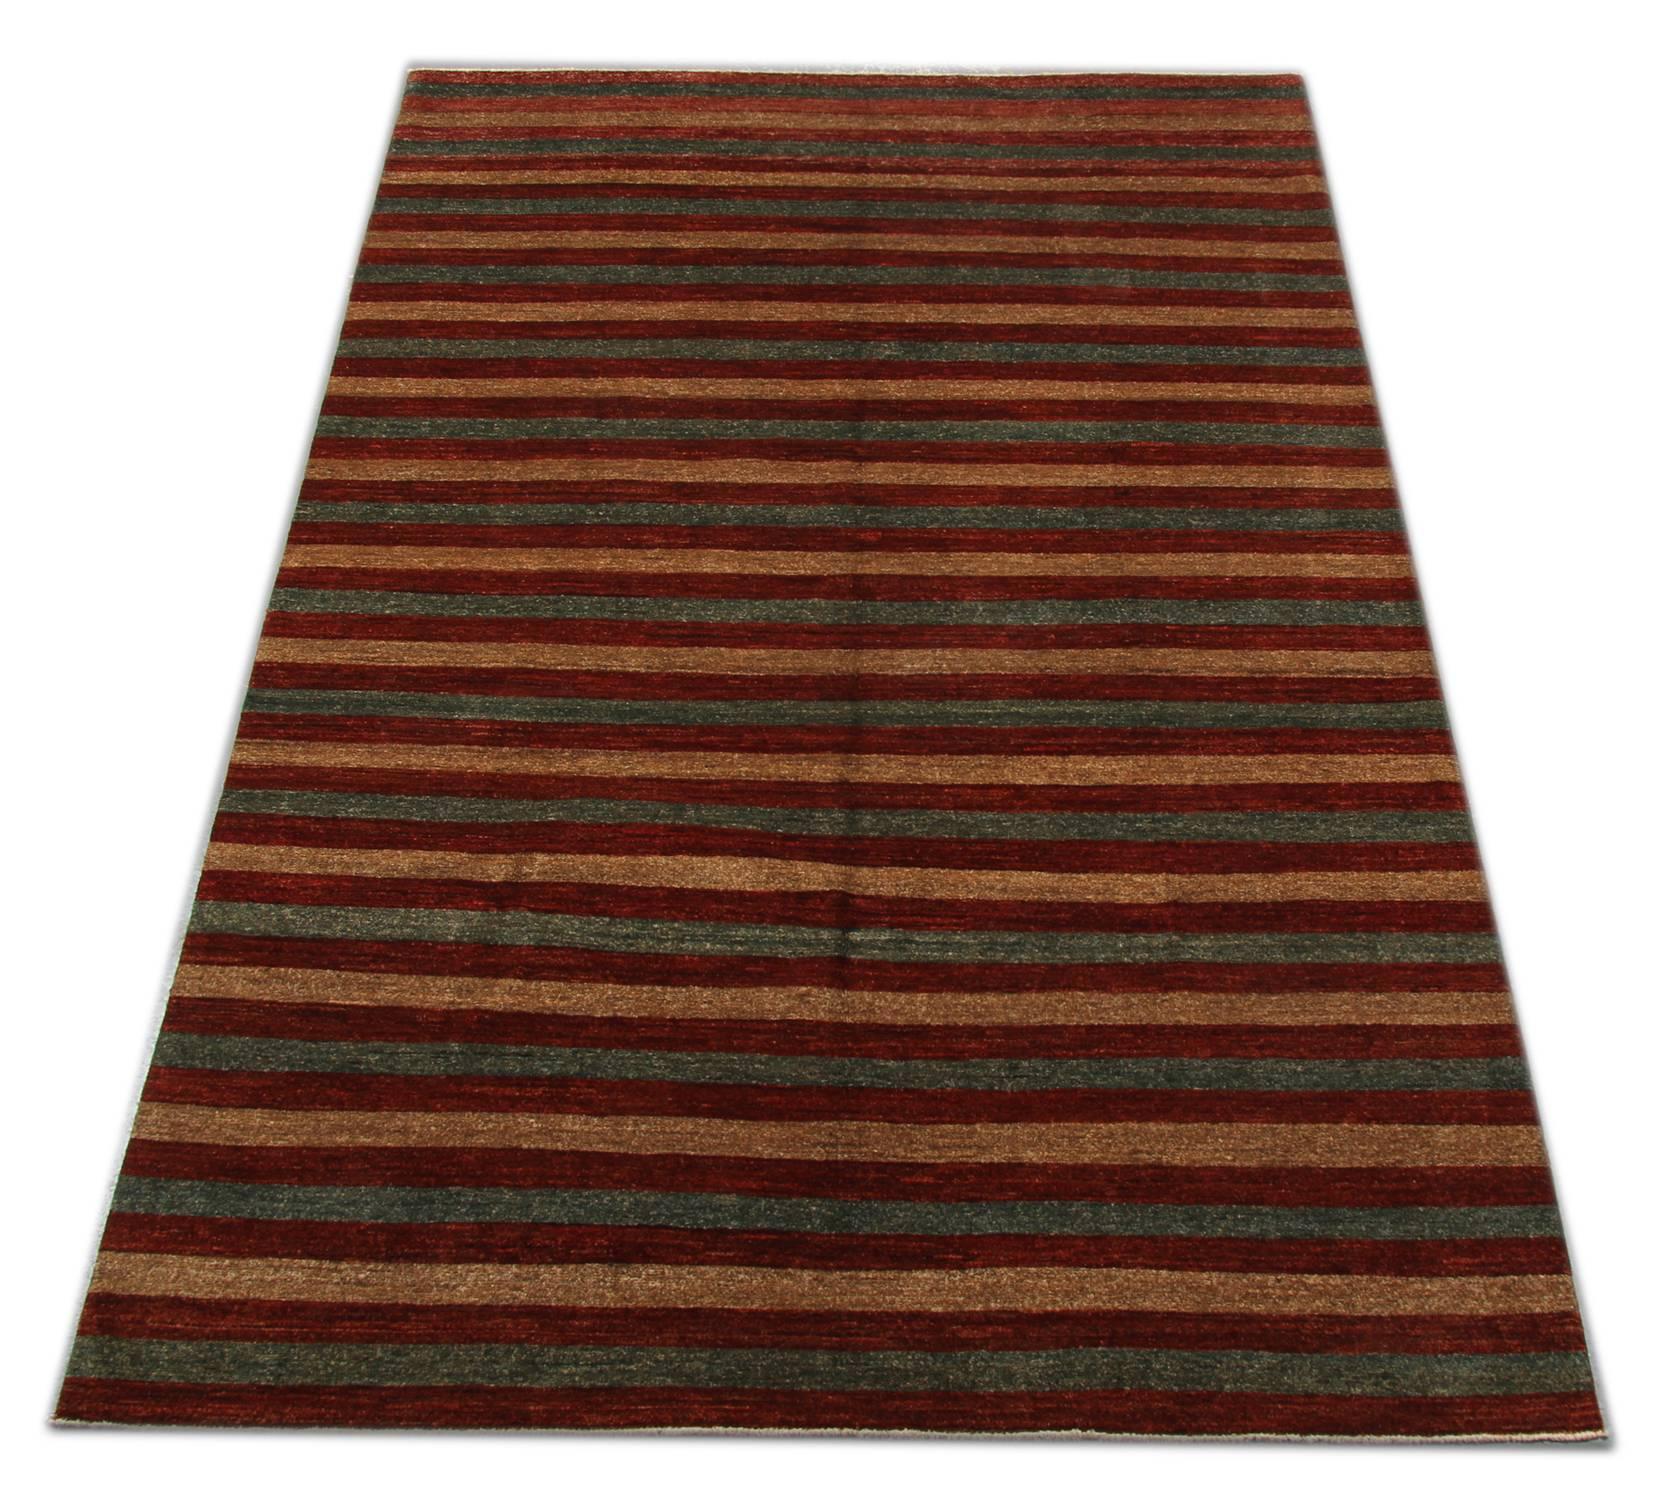 Oriental rug with rich colors and abstract elements, this modern woven rug gives a subtle contemporary appearance. Featuring a beautiful palette of gold green and red colors, this striped rug is grounded in stylish colors that will add a touch of